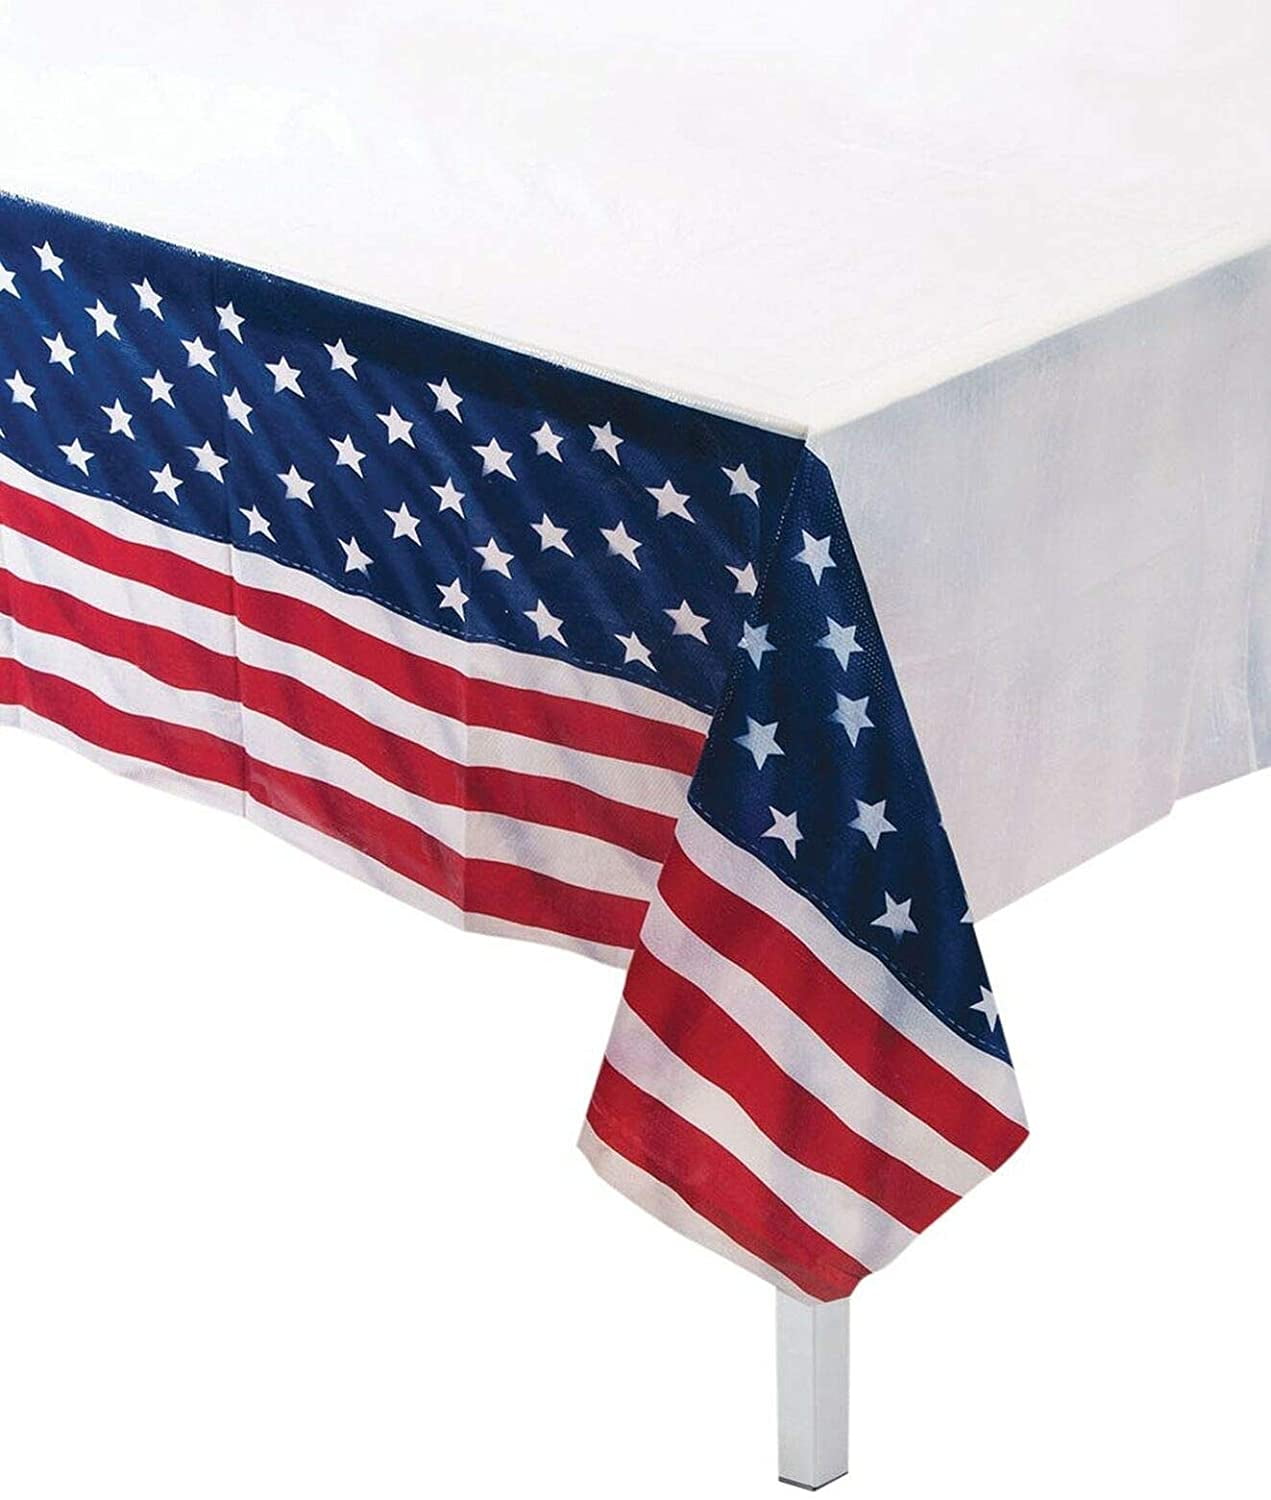 American Flag Printed Tablecloth Red White Blue Fabric Americana Patriotic Asst 